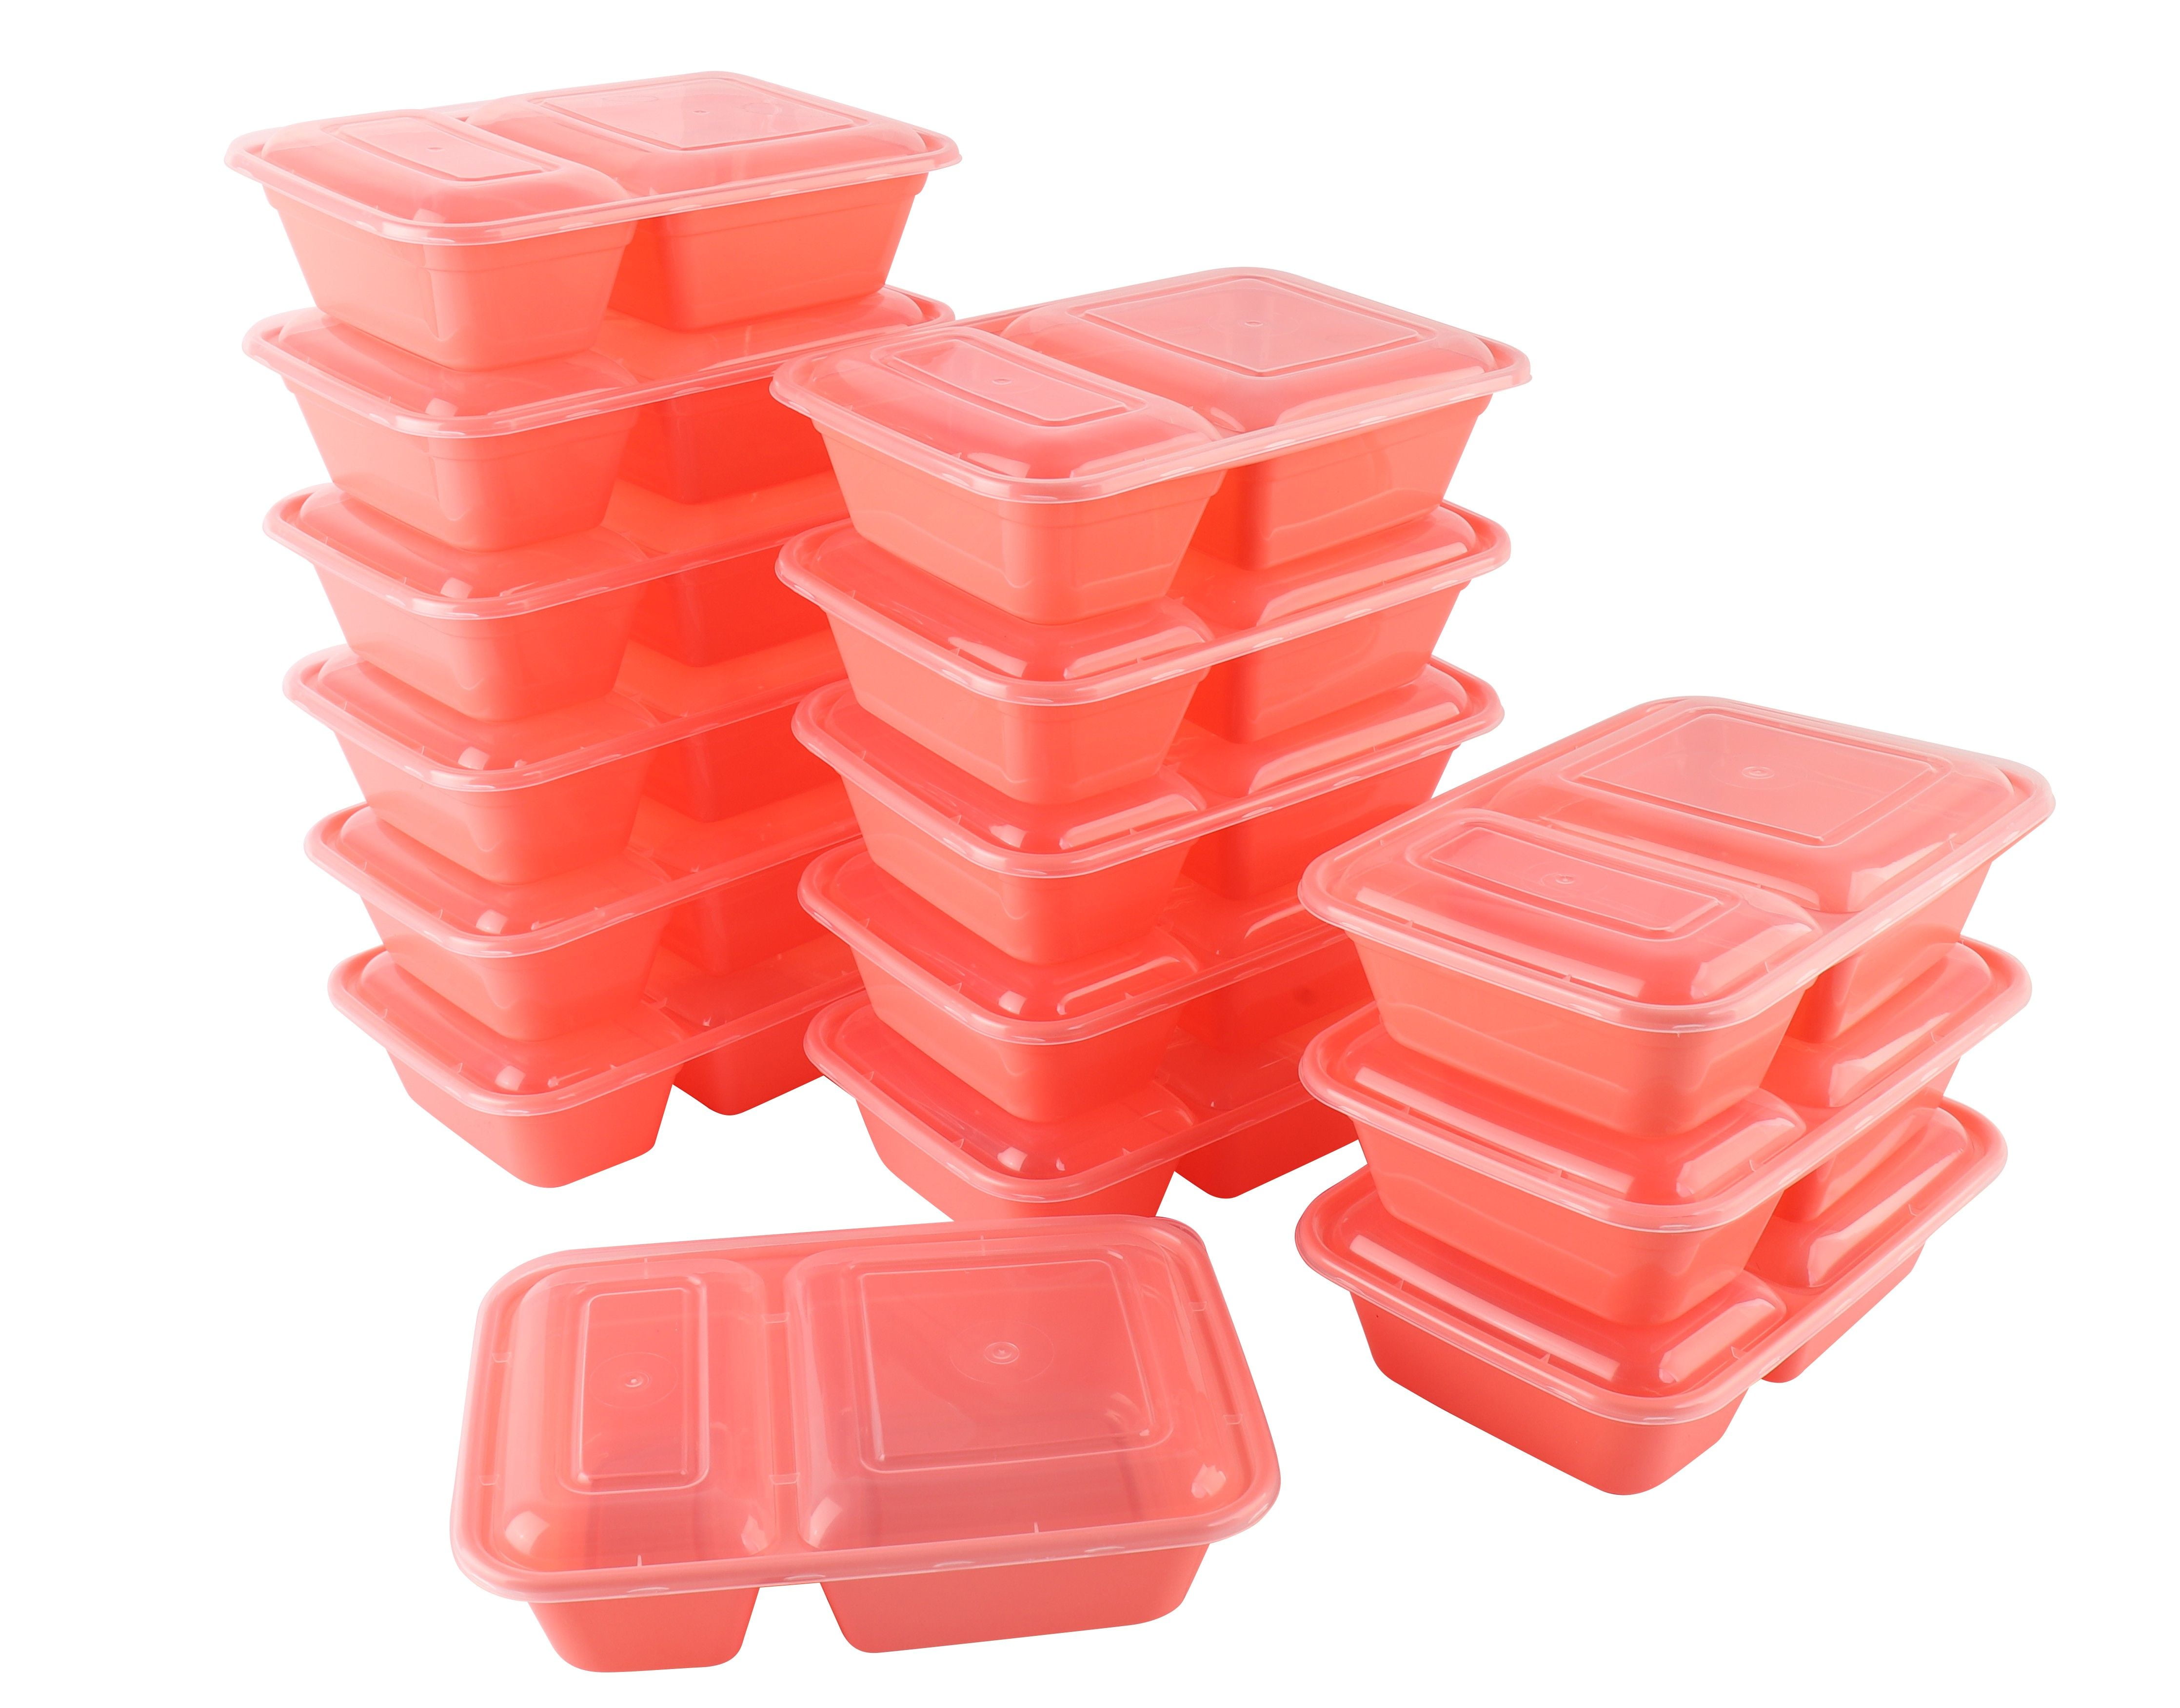 Mainstays 2 Compartment 3.78Cups Meal Prep Container, Coral Bell